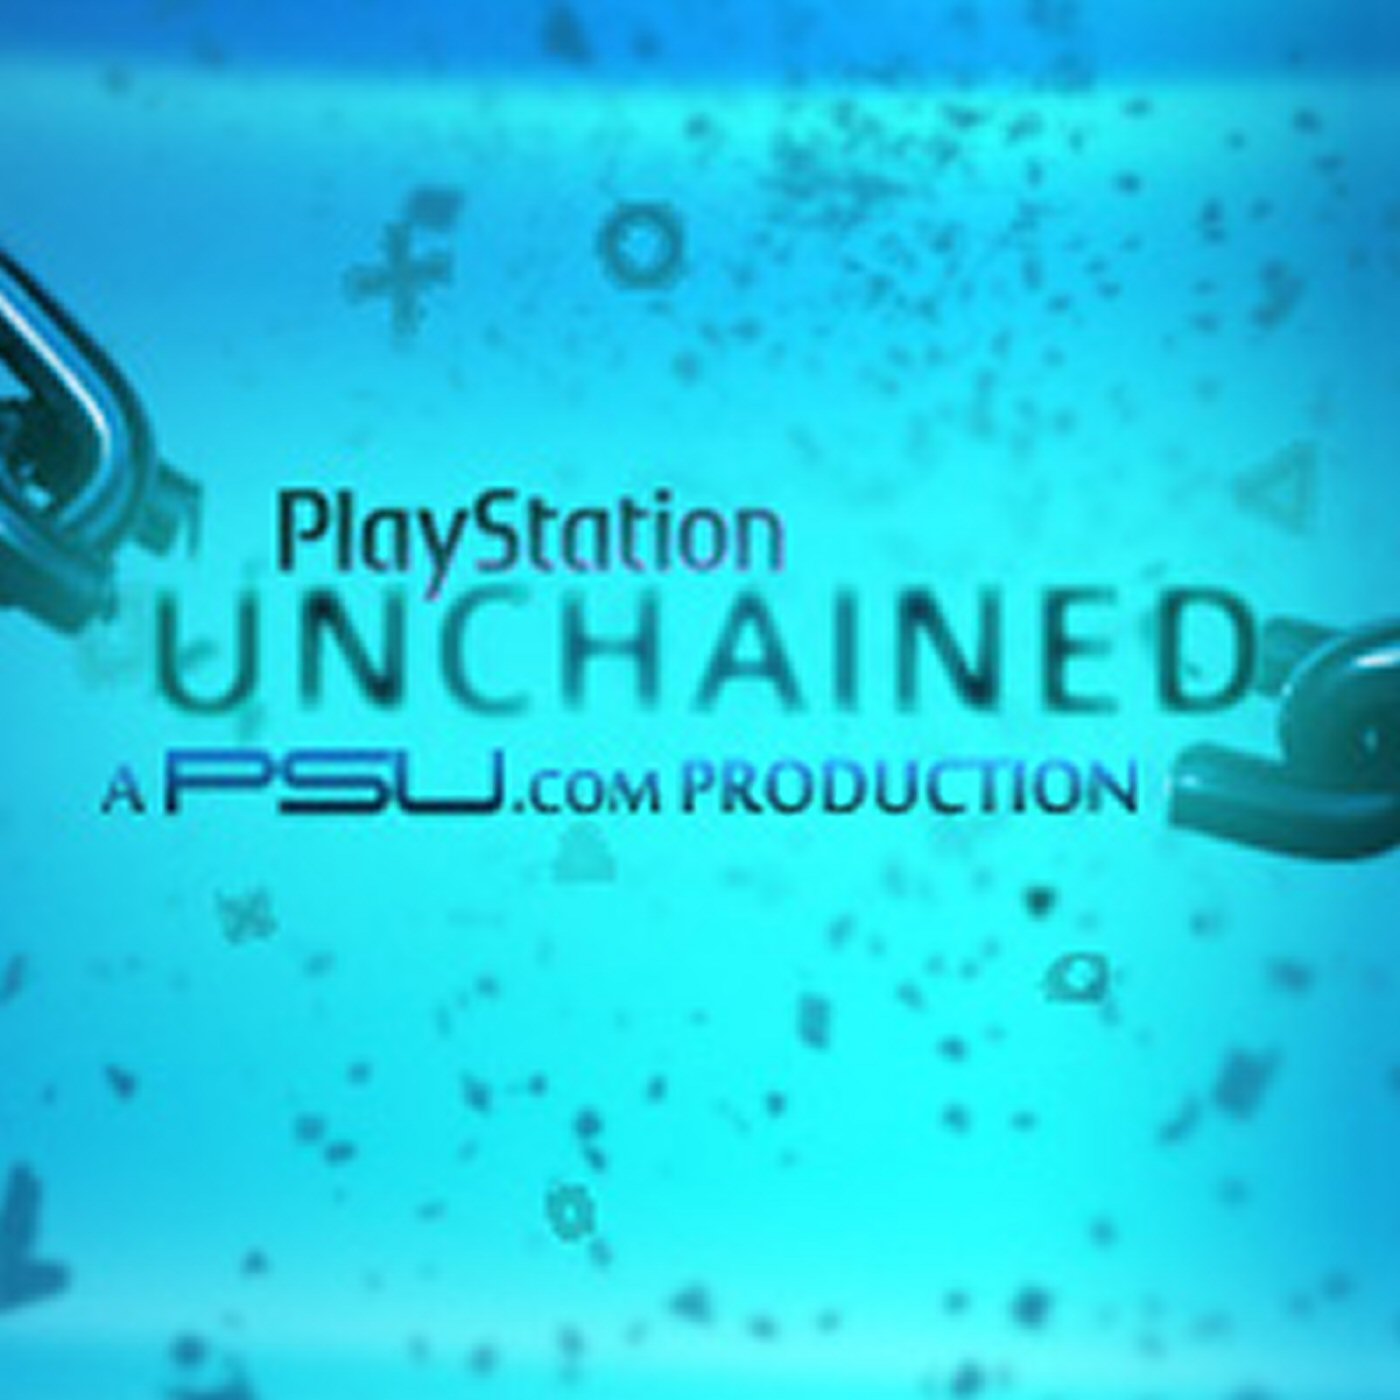 PlayStation Unchained - Episode 4 - News and gossip from the world of PlayStation